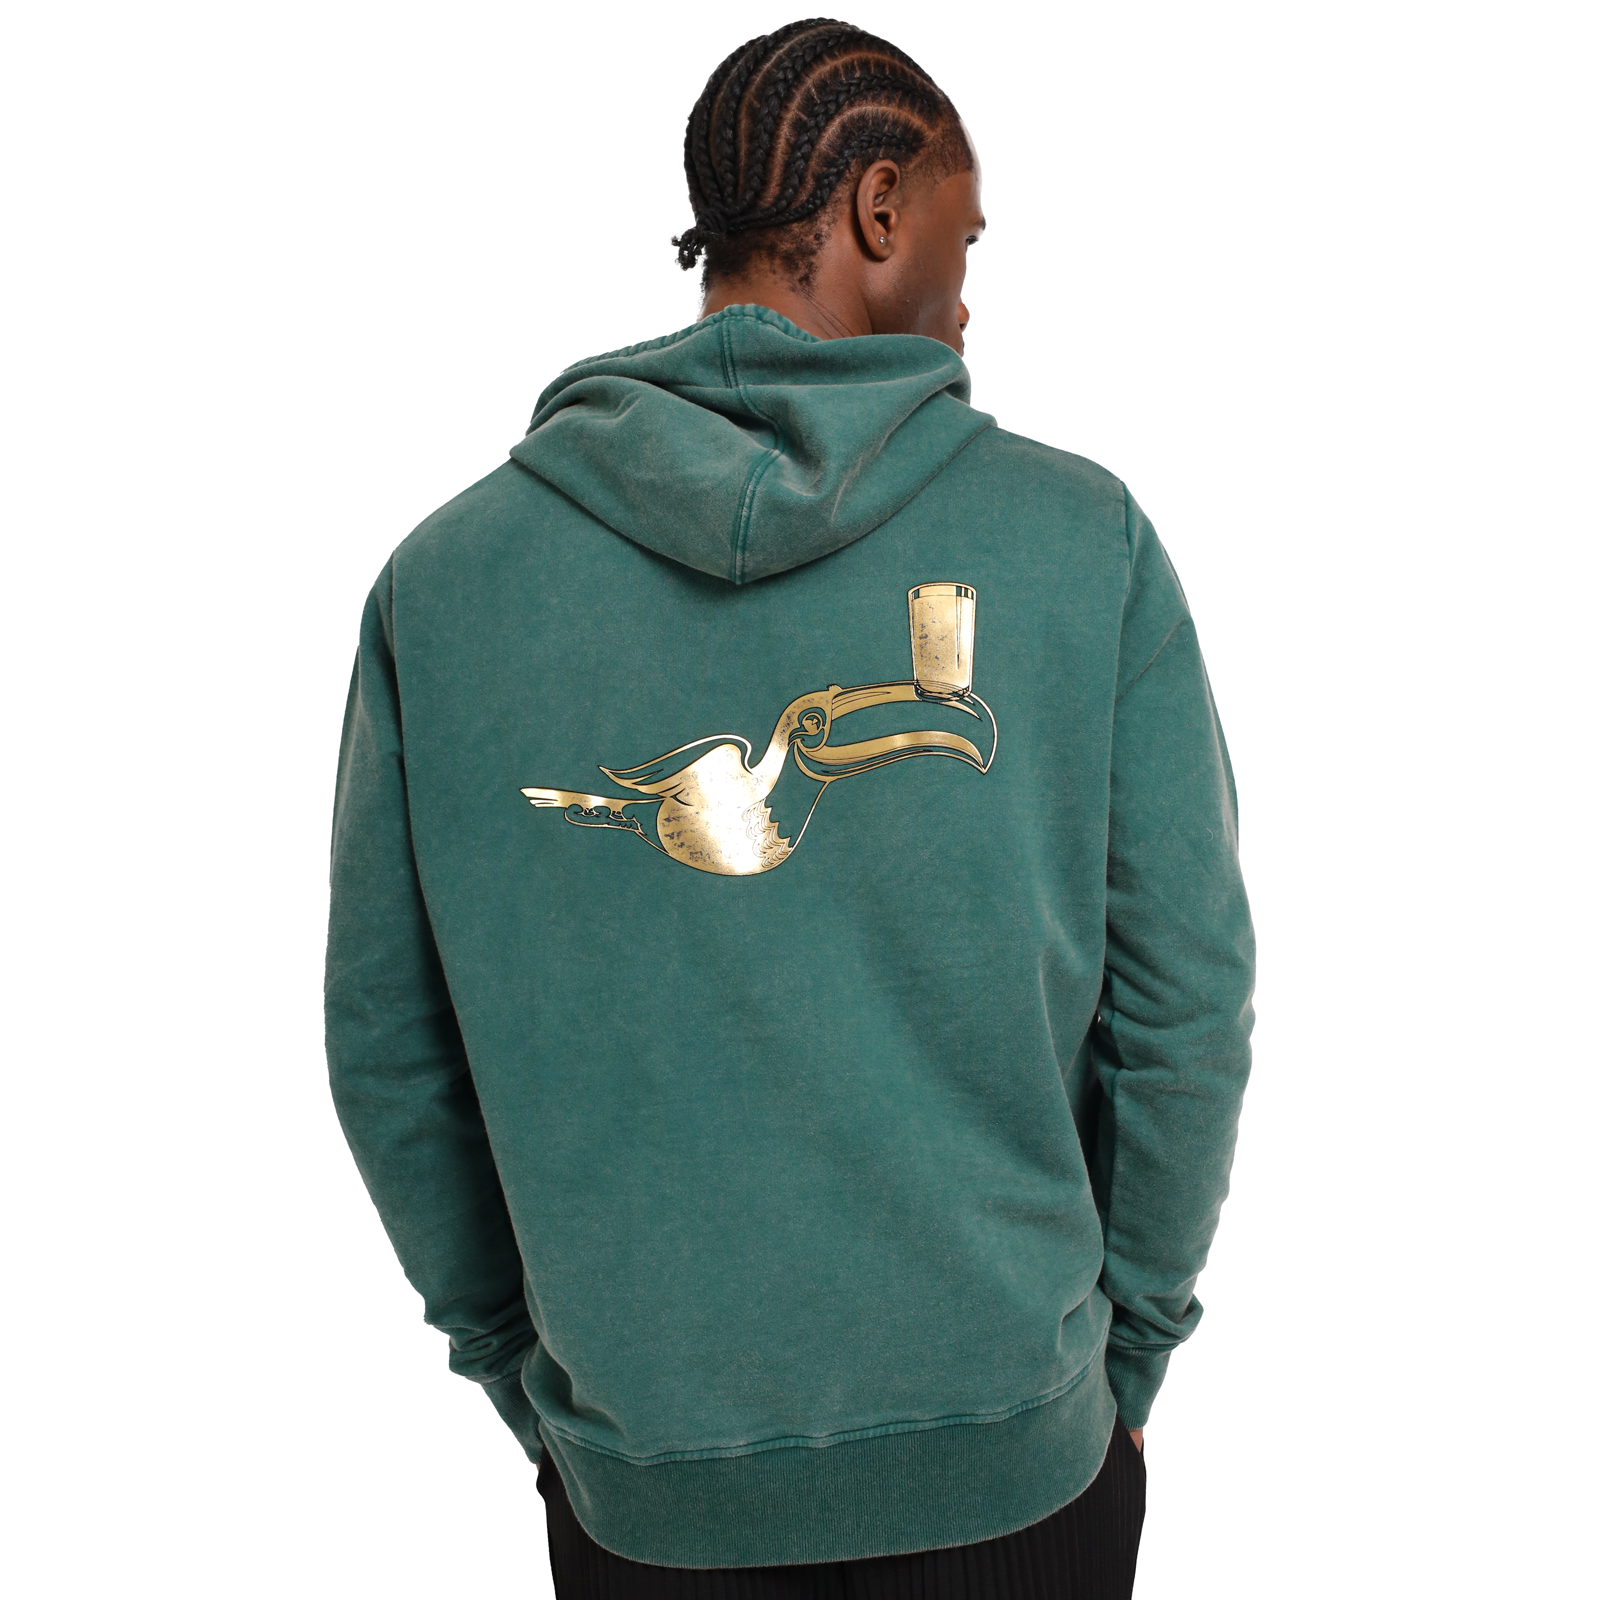 The back of a man wearing a Guinness Forest Green & Gold Toucan Hoodie made of eco-friendly fabric with gold lettering from the Guinness Webstore UK.